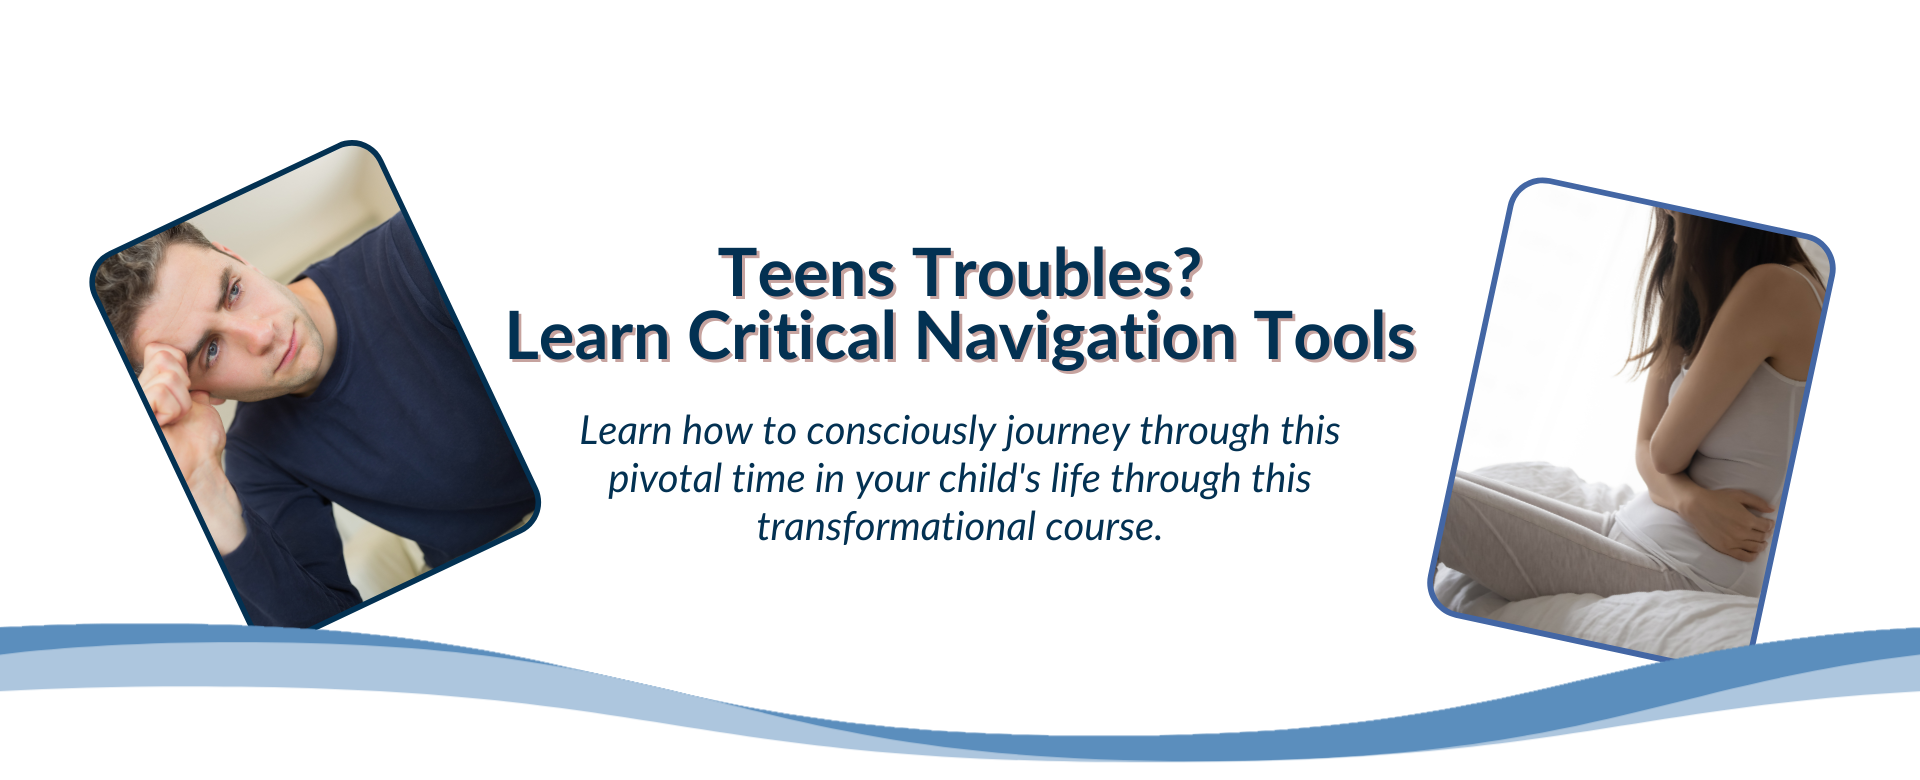 Teens Troubles? Learn Critical Navigation Tools